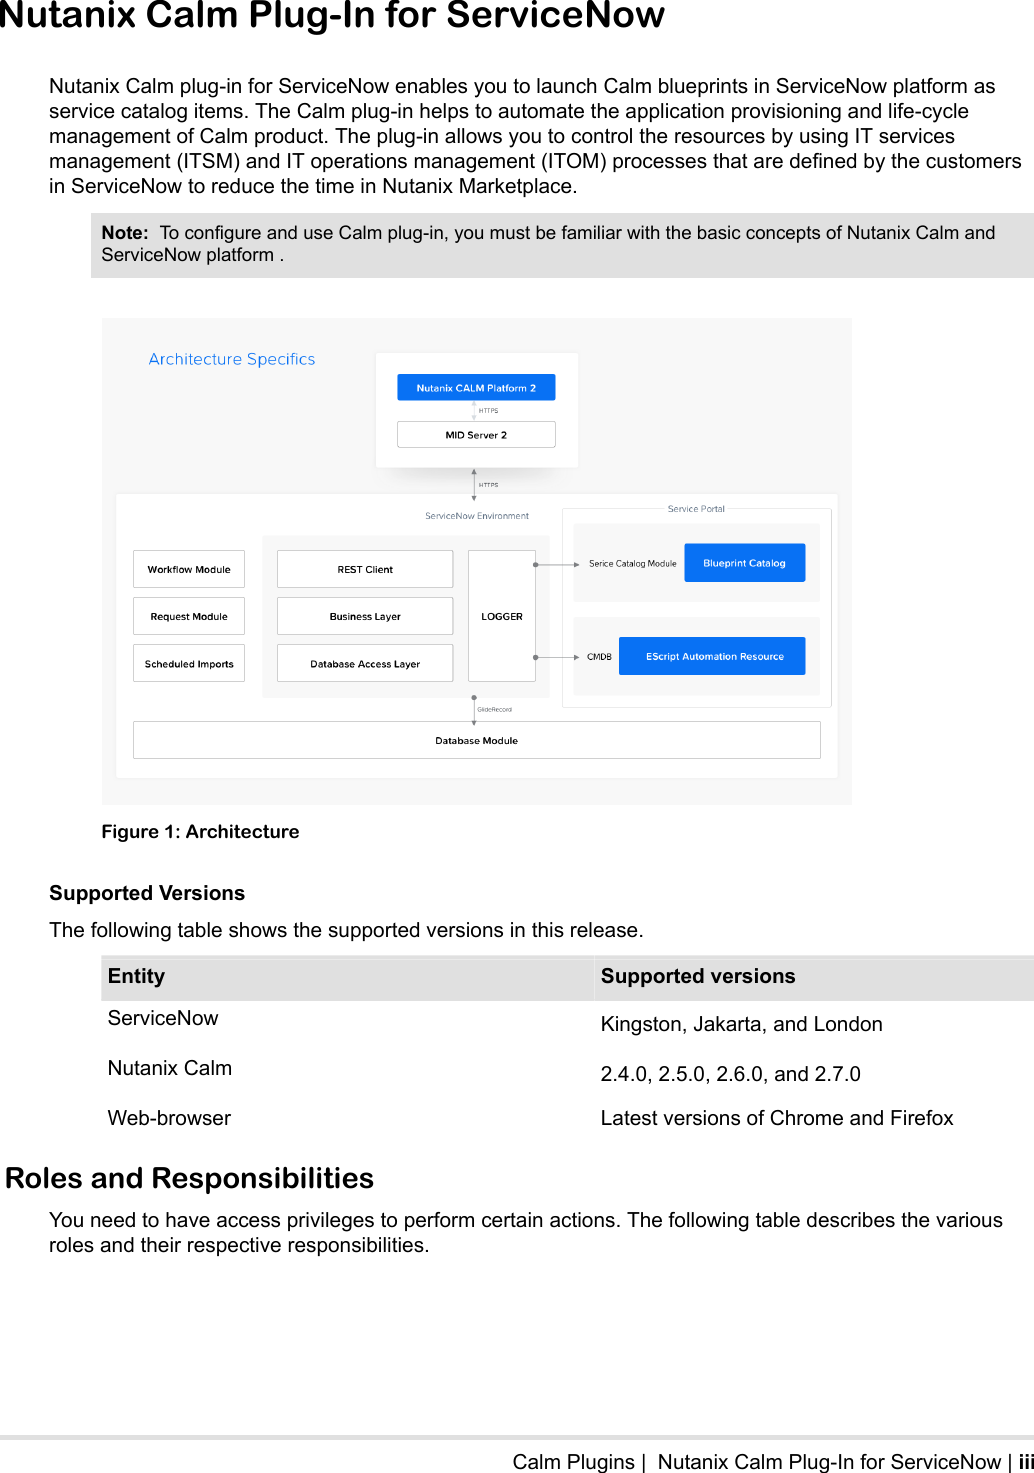 Page 3 of 9 - ServiceNow Calm Plug-In User Guide Calm-Service Now-Plug-In-User-Guide-v1.0